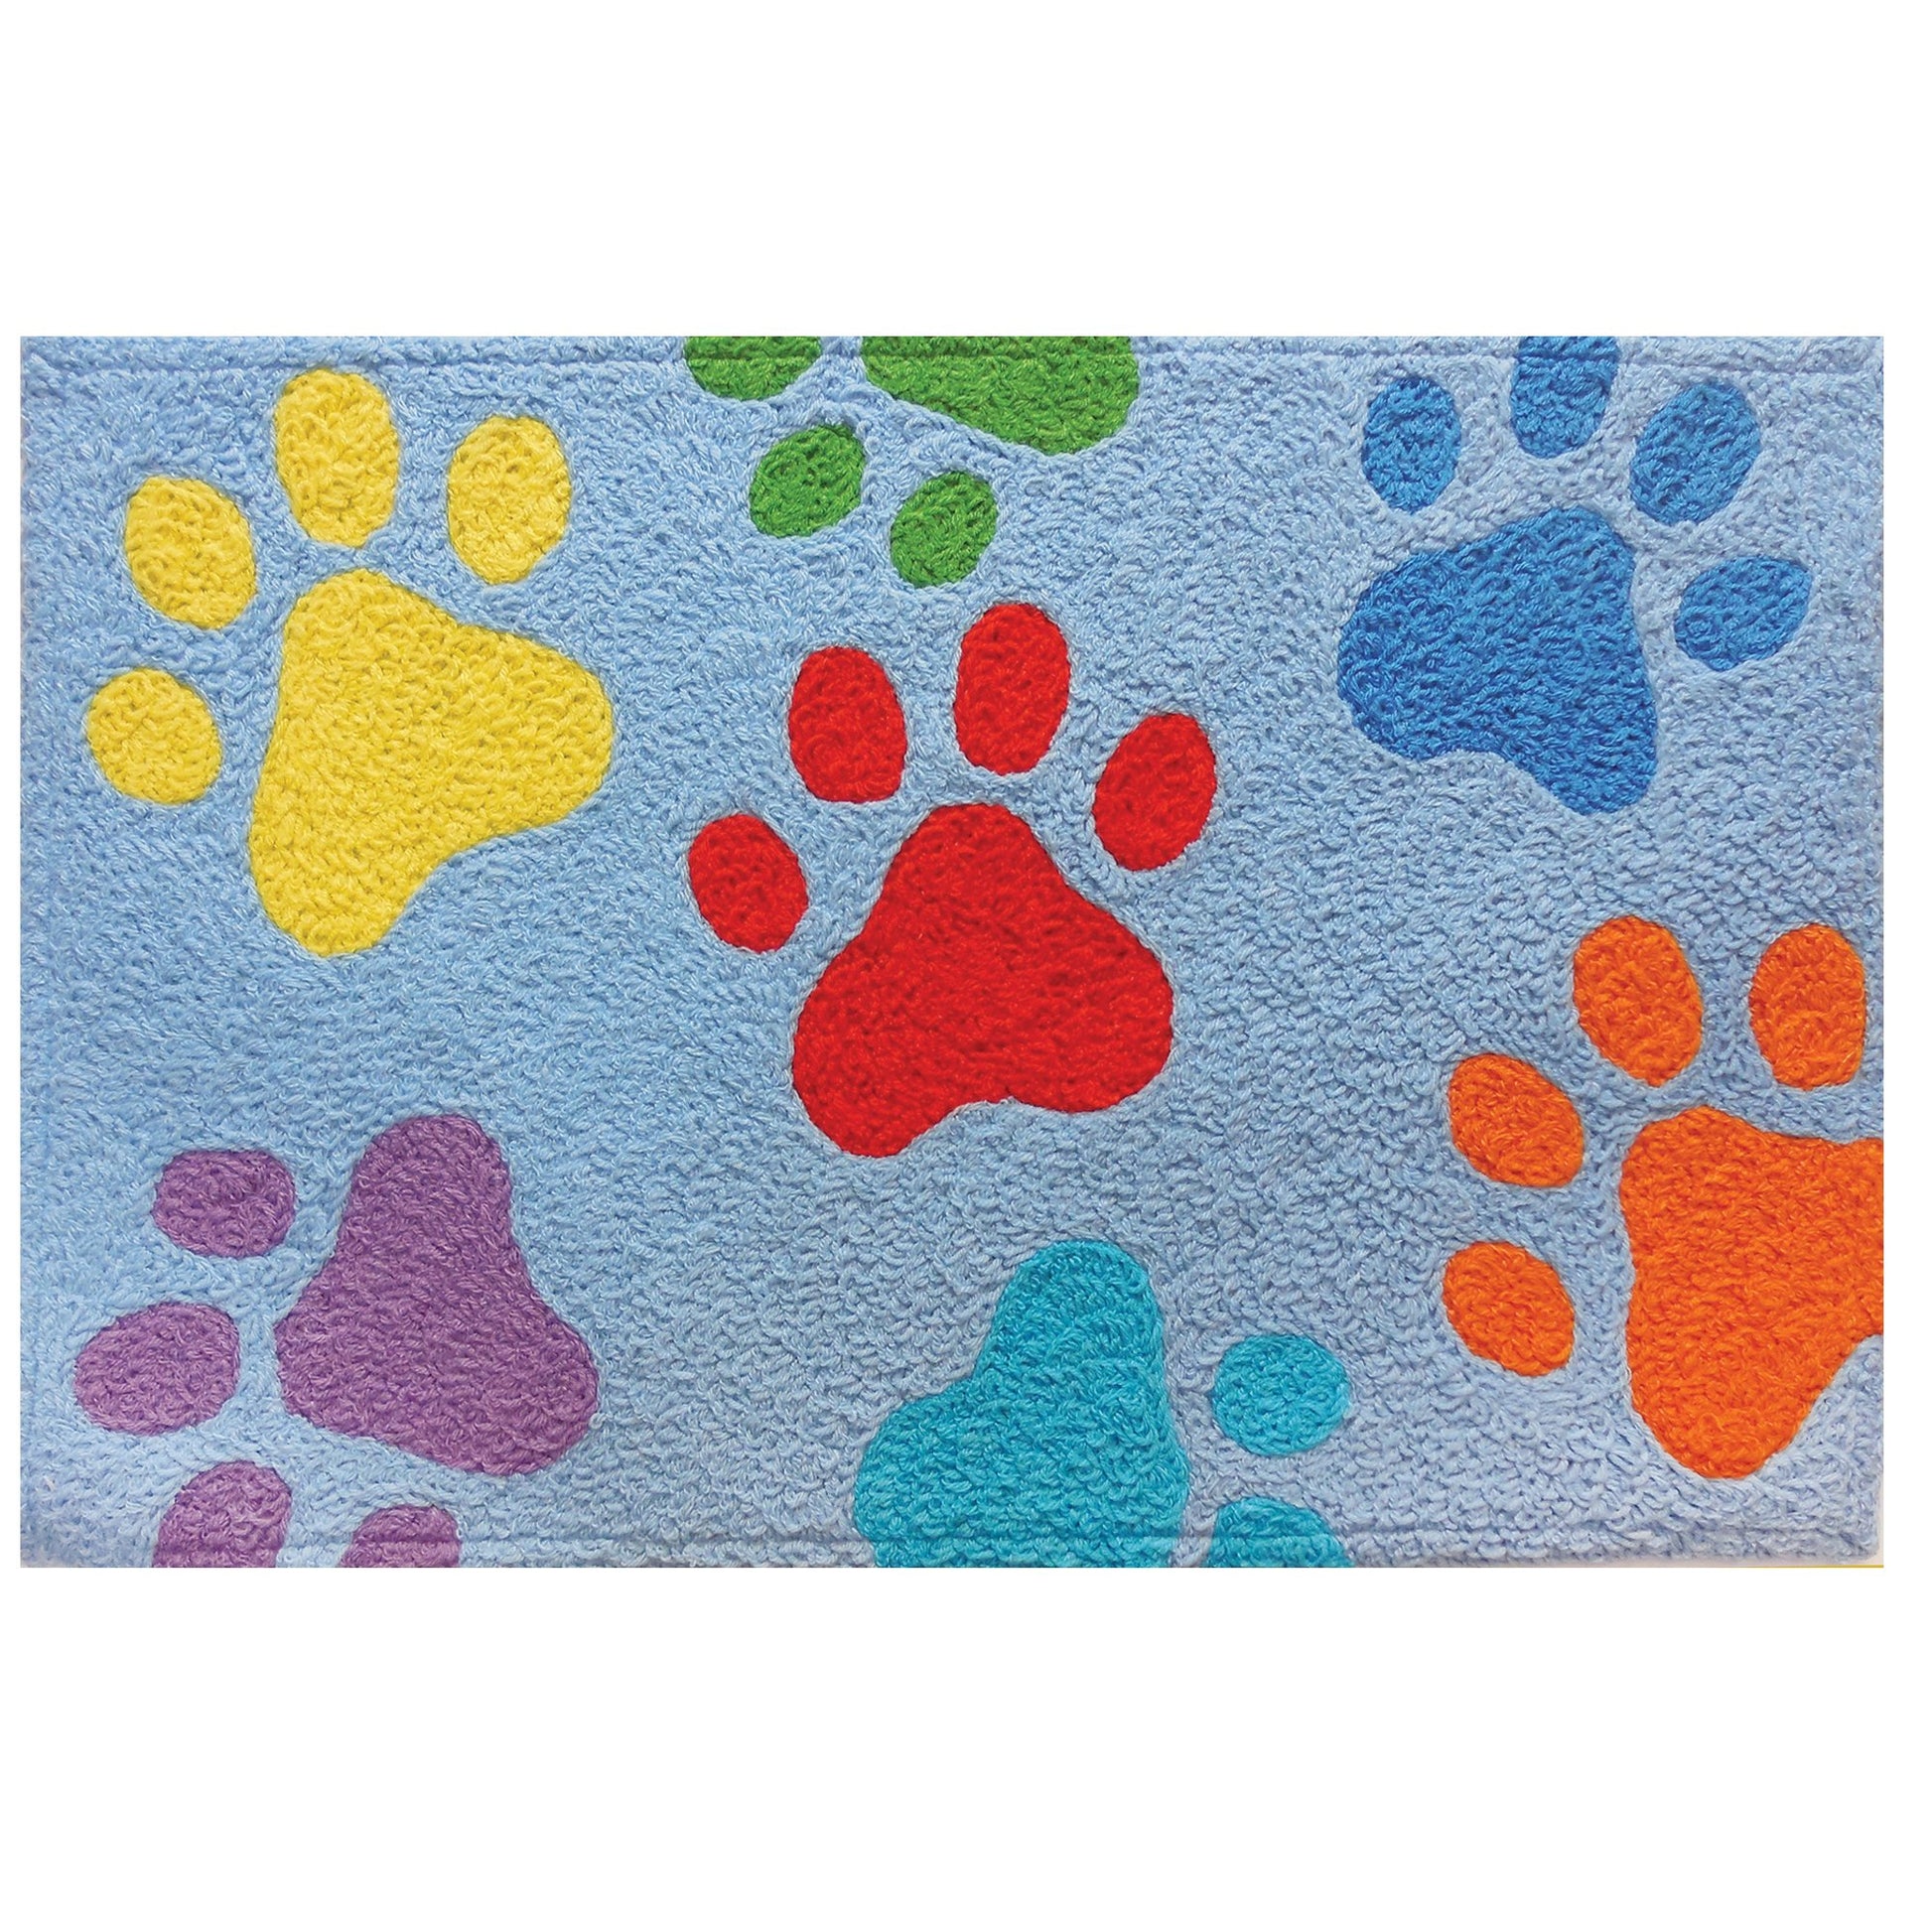 Colorful Paws Jellybean Rug